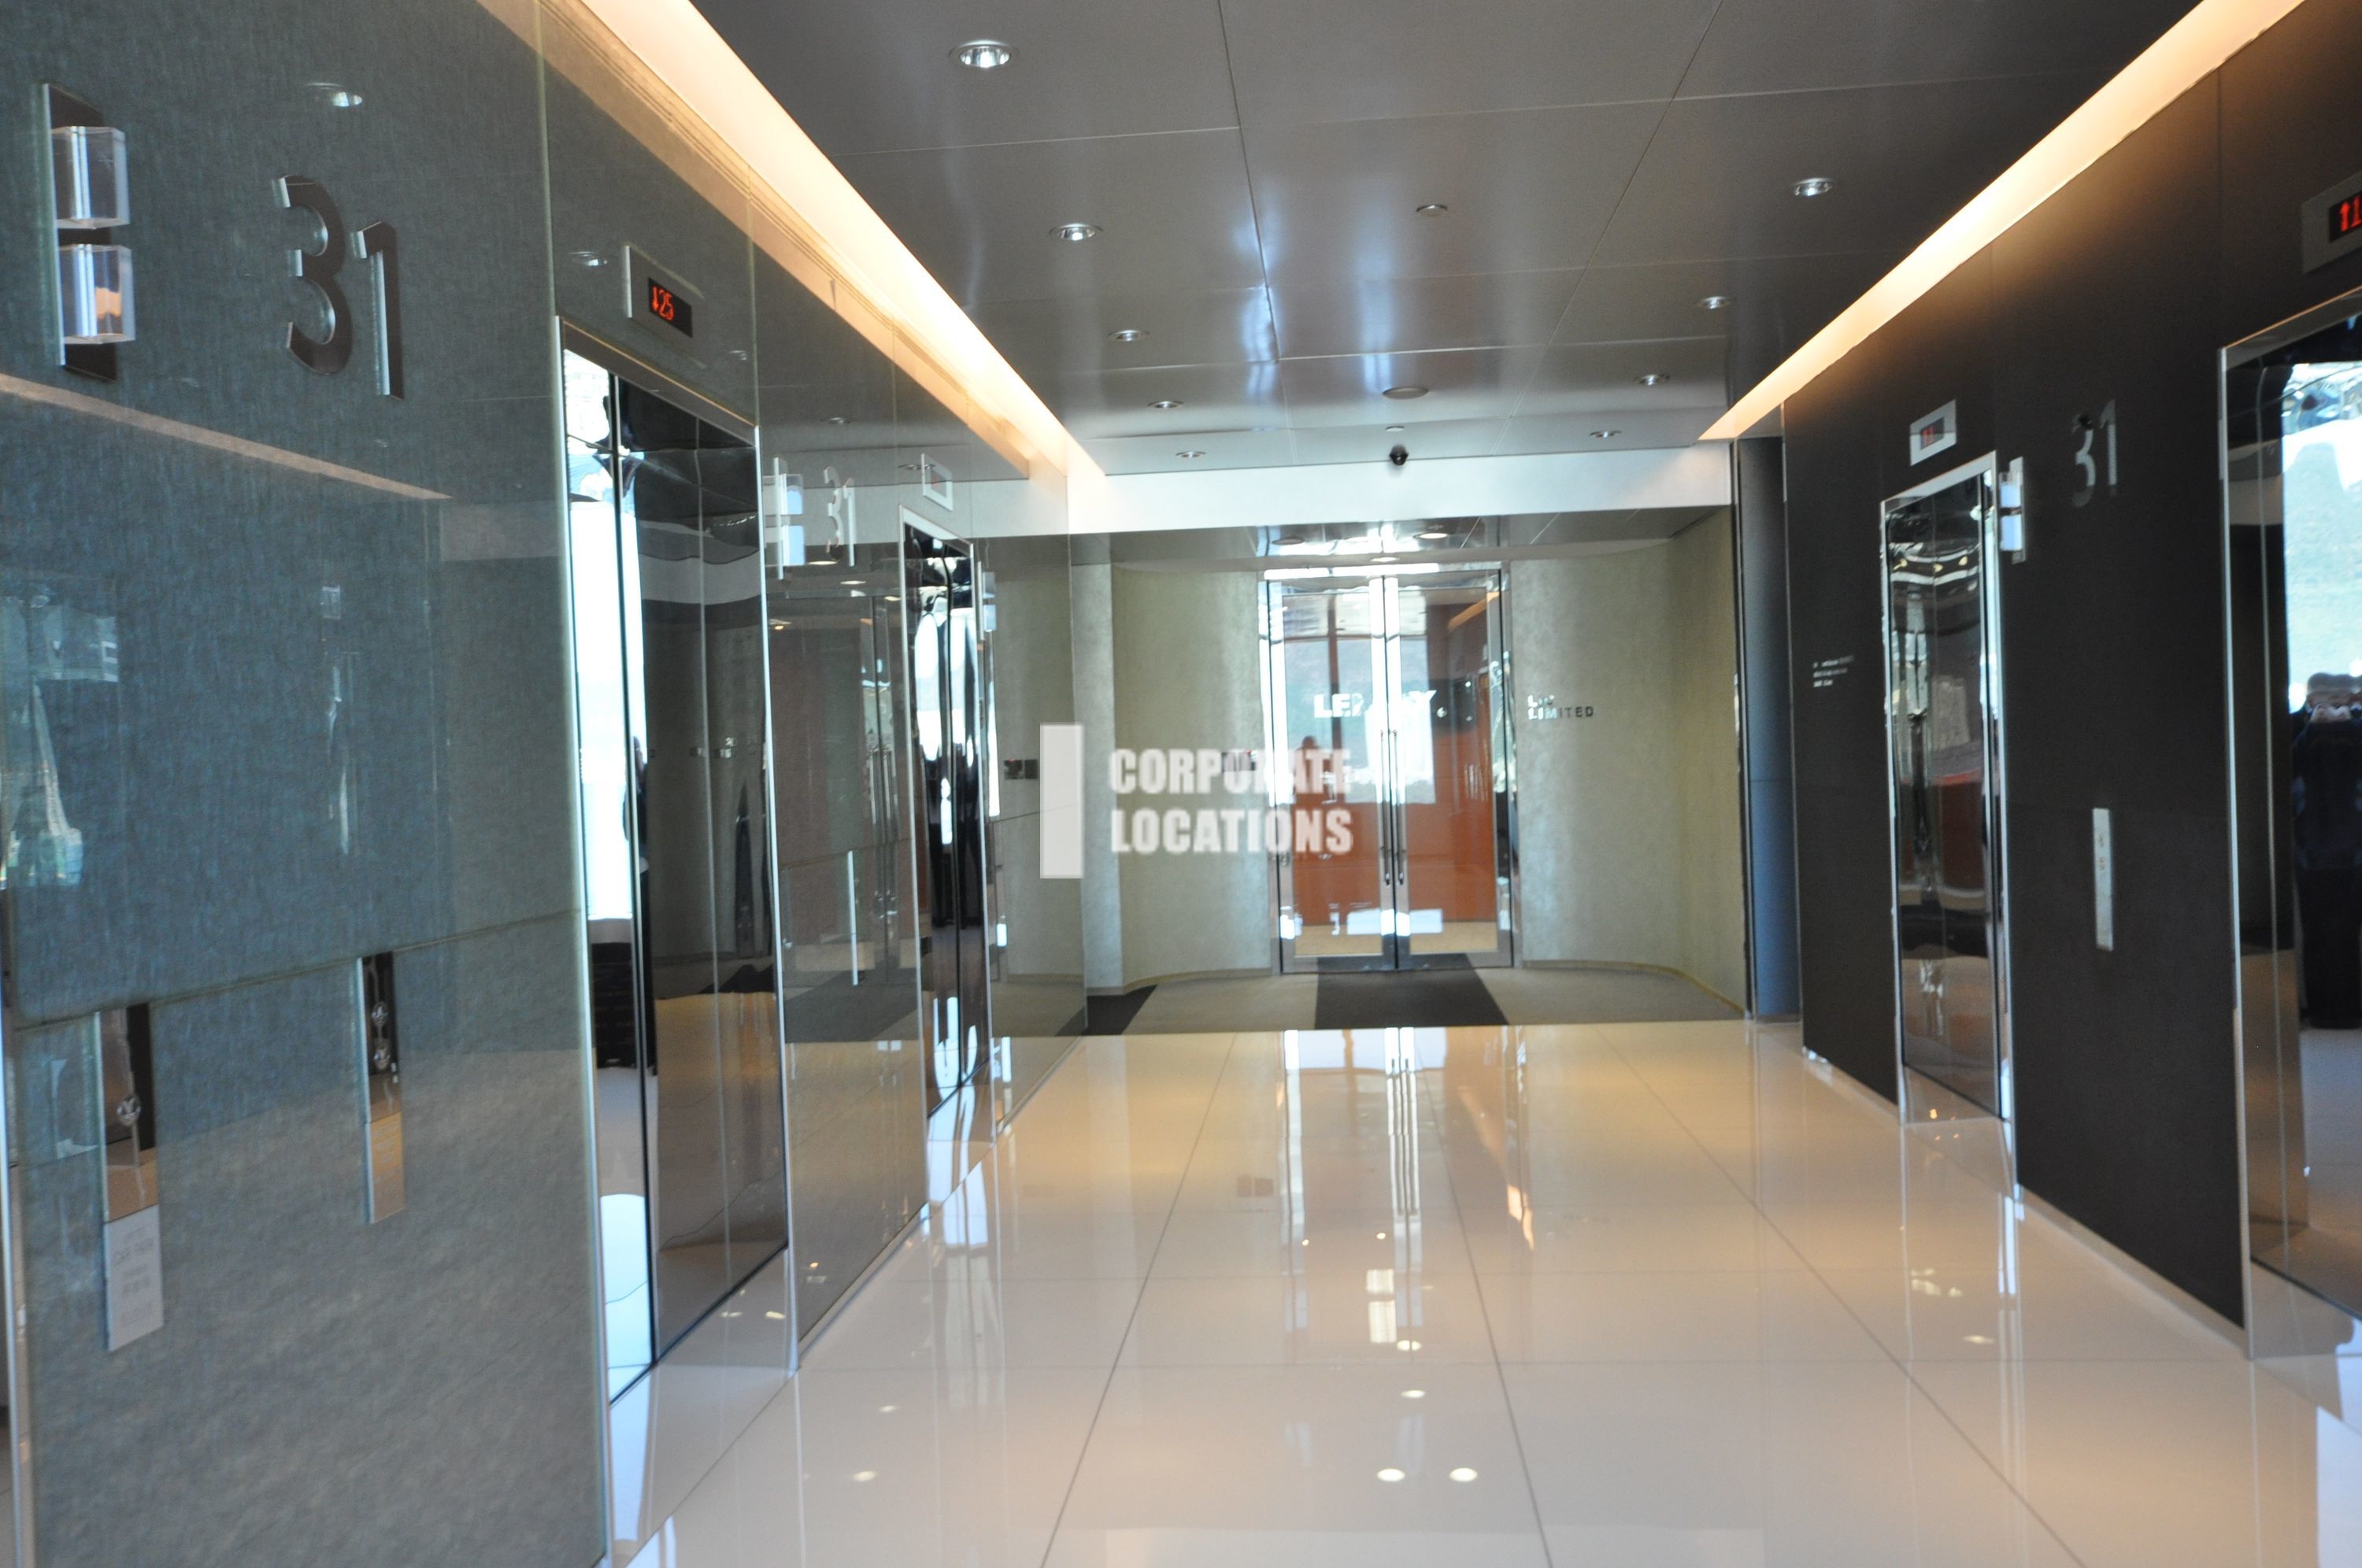 Lease offices in Enterprise Square Five Tower 1 - Kowloon Bay / Kwun Tong